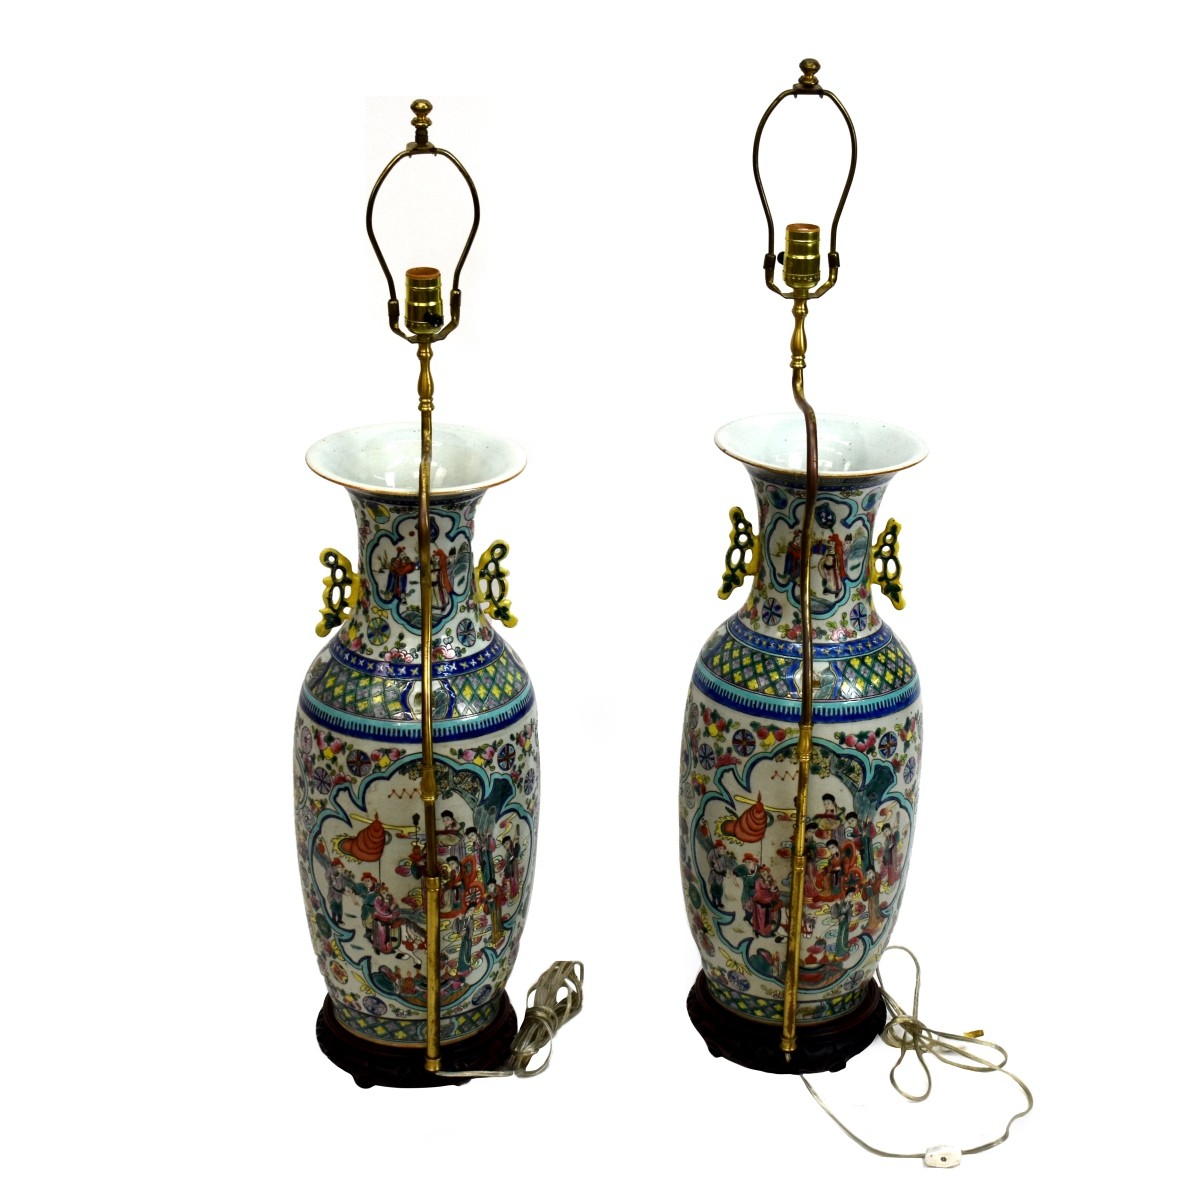 Pair of Large Chinese Vases Mounted as Lamps